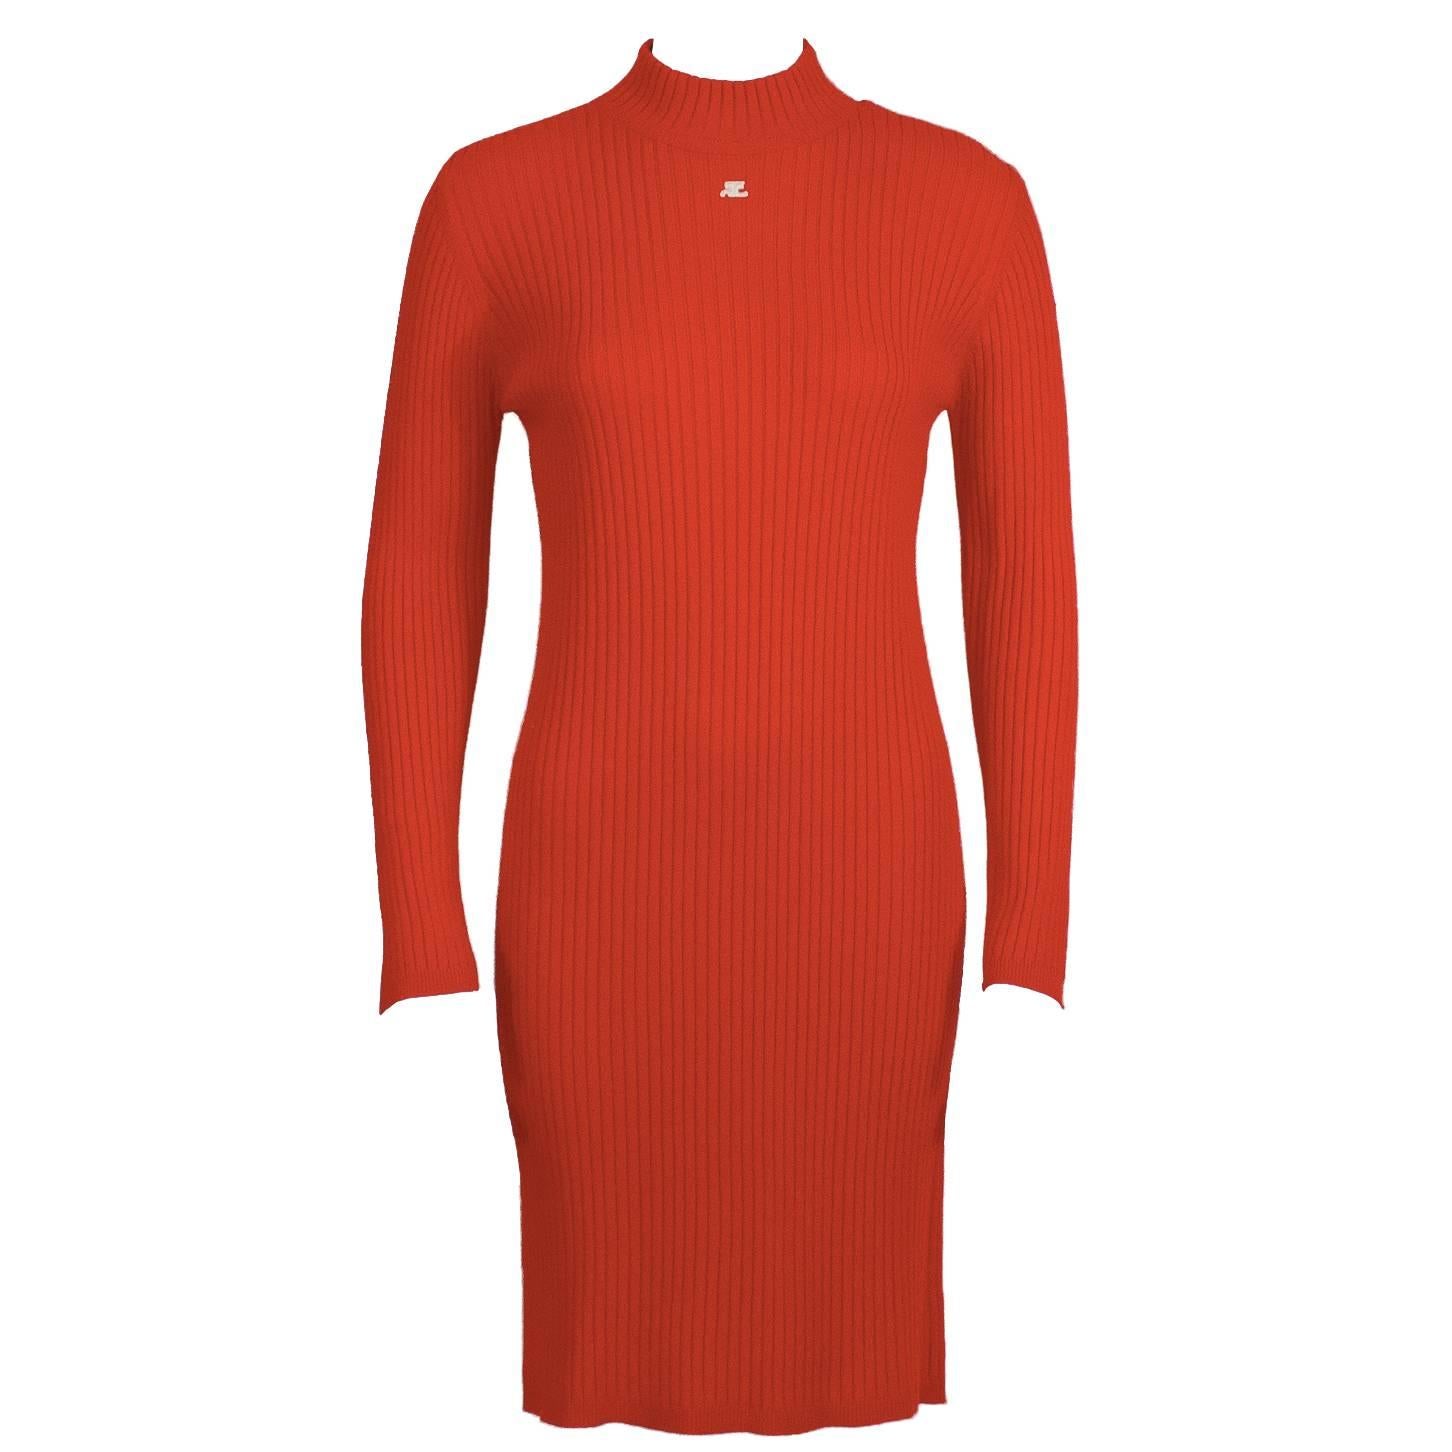 1980's 2nd Gen Courreges Neon Red Knit Sweater Dress For Sale